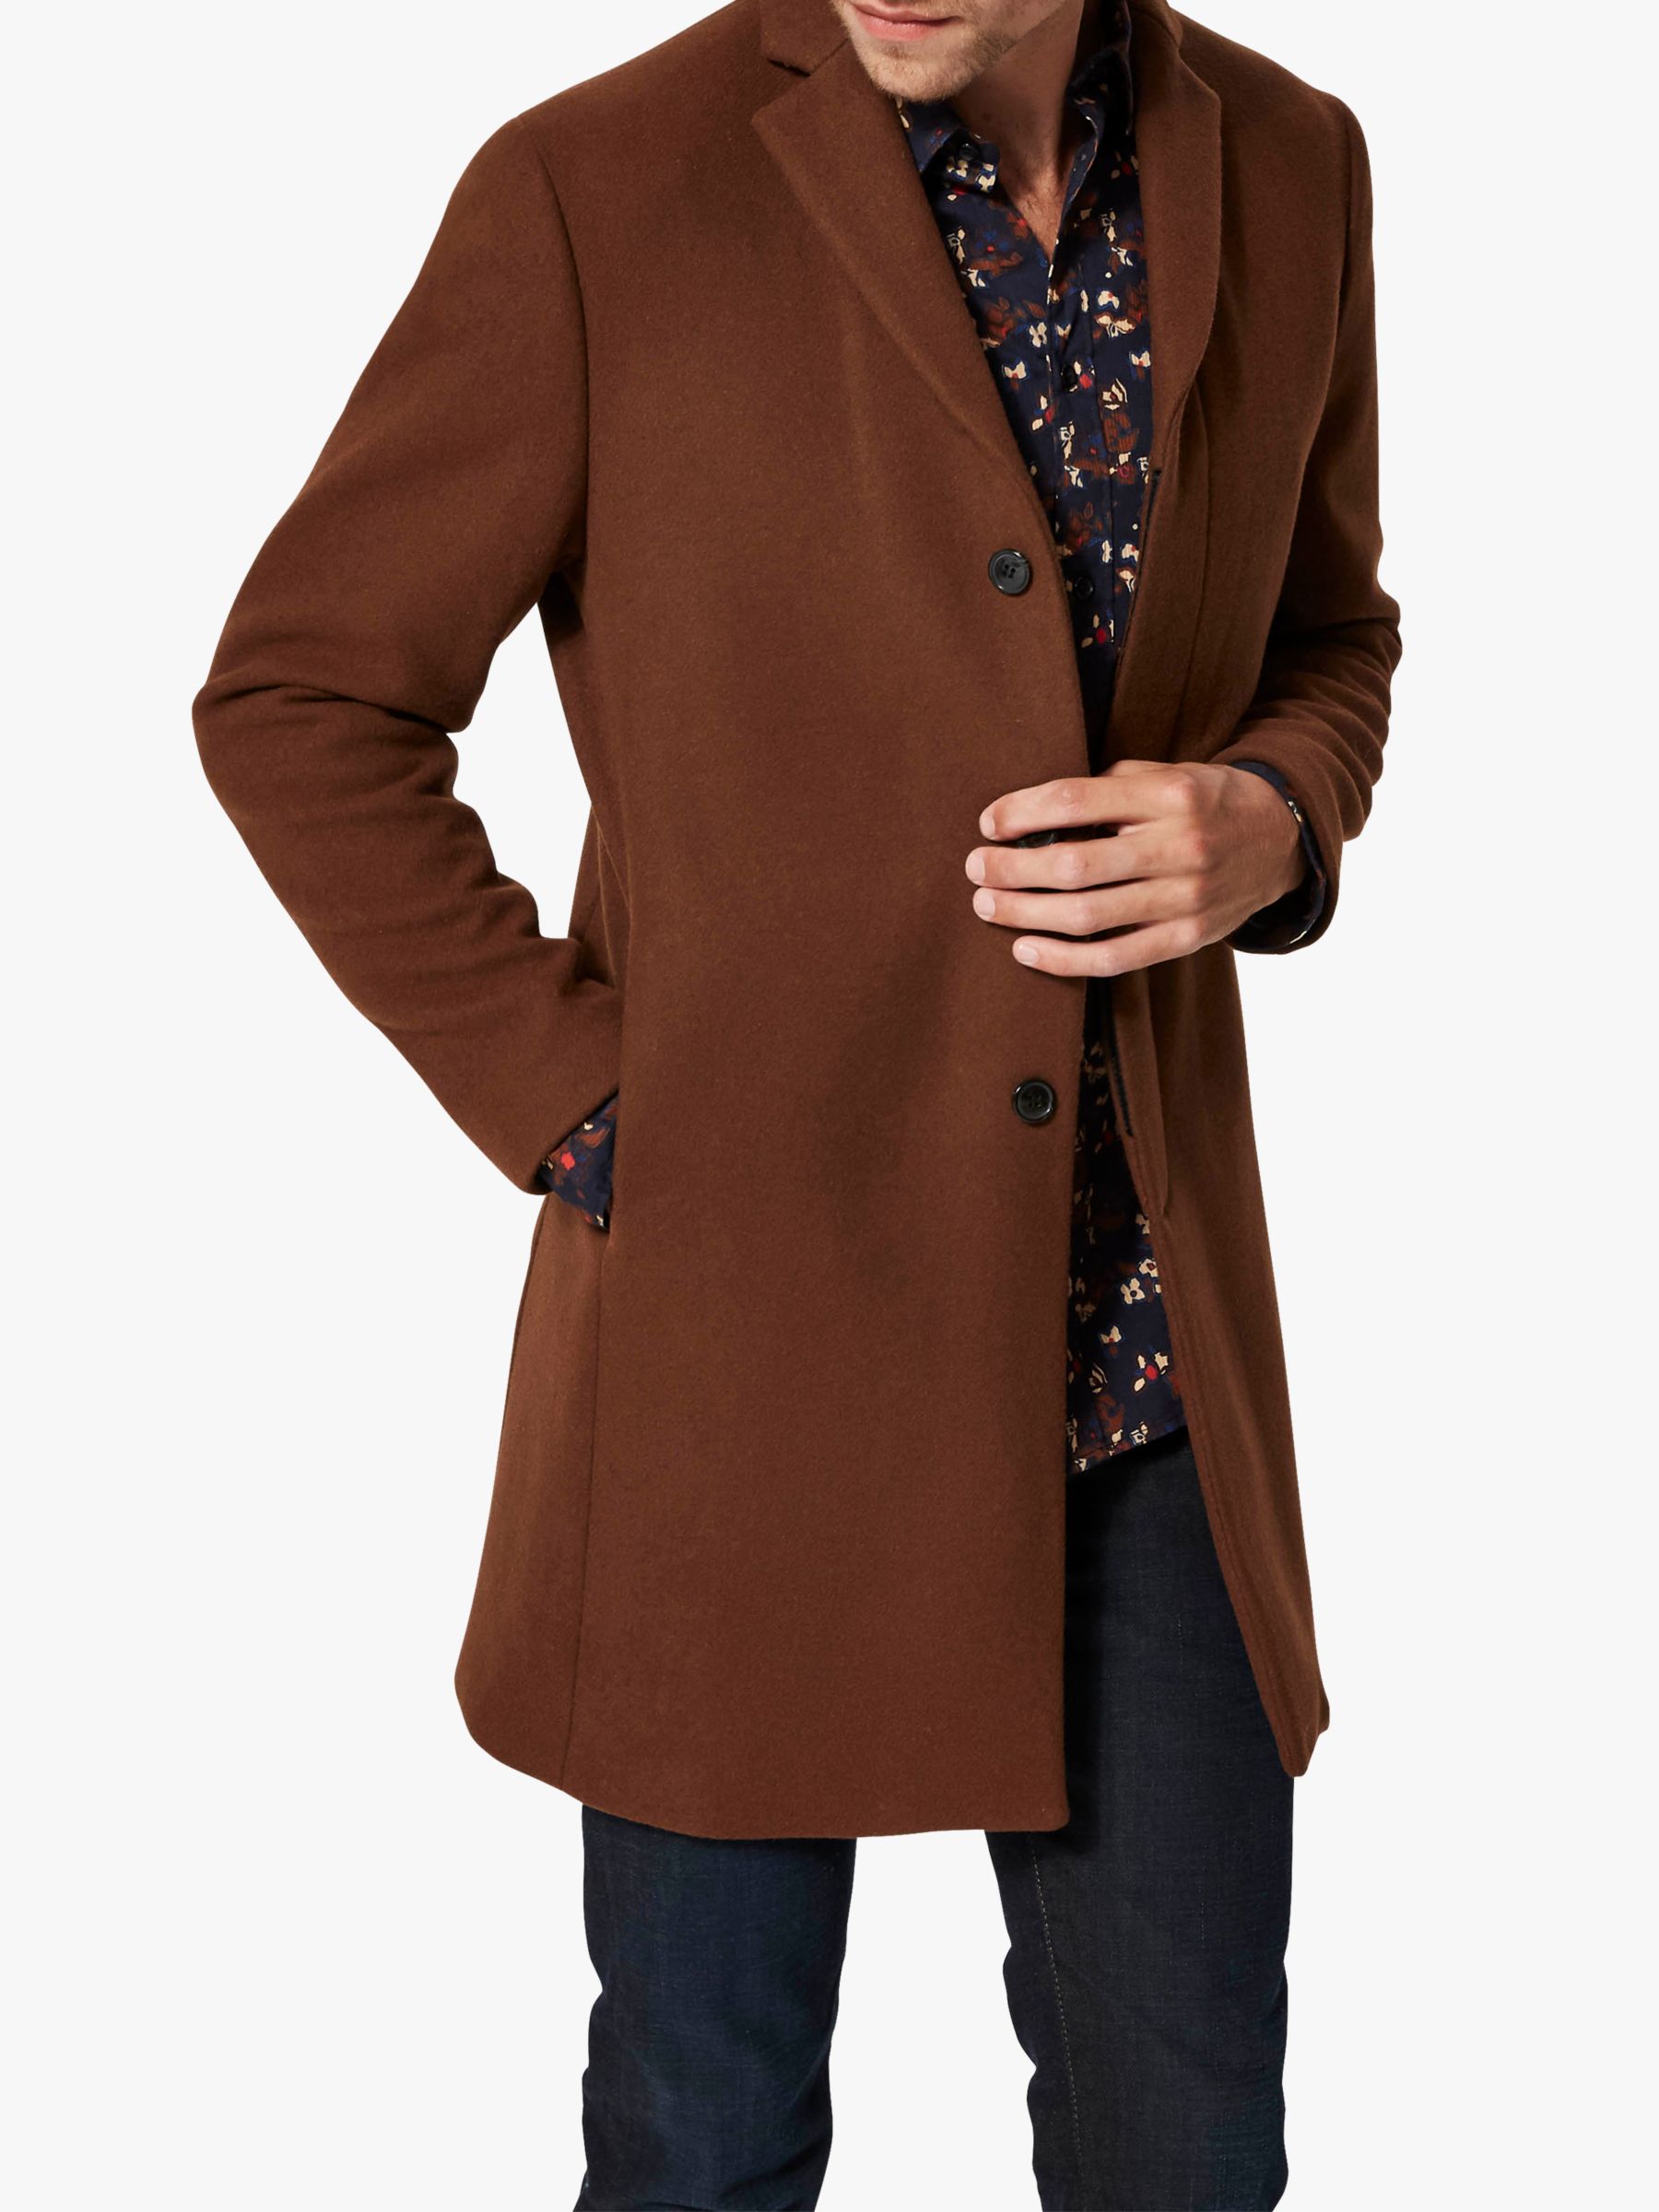 Selected Homme Wool Coat Brown At John Lewis And Partners